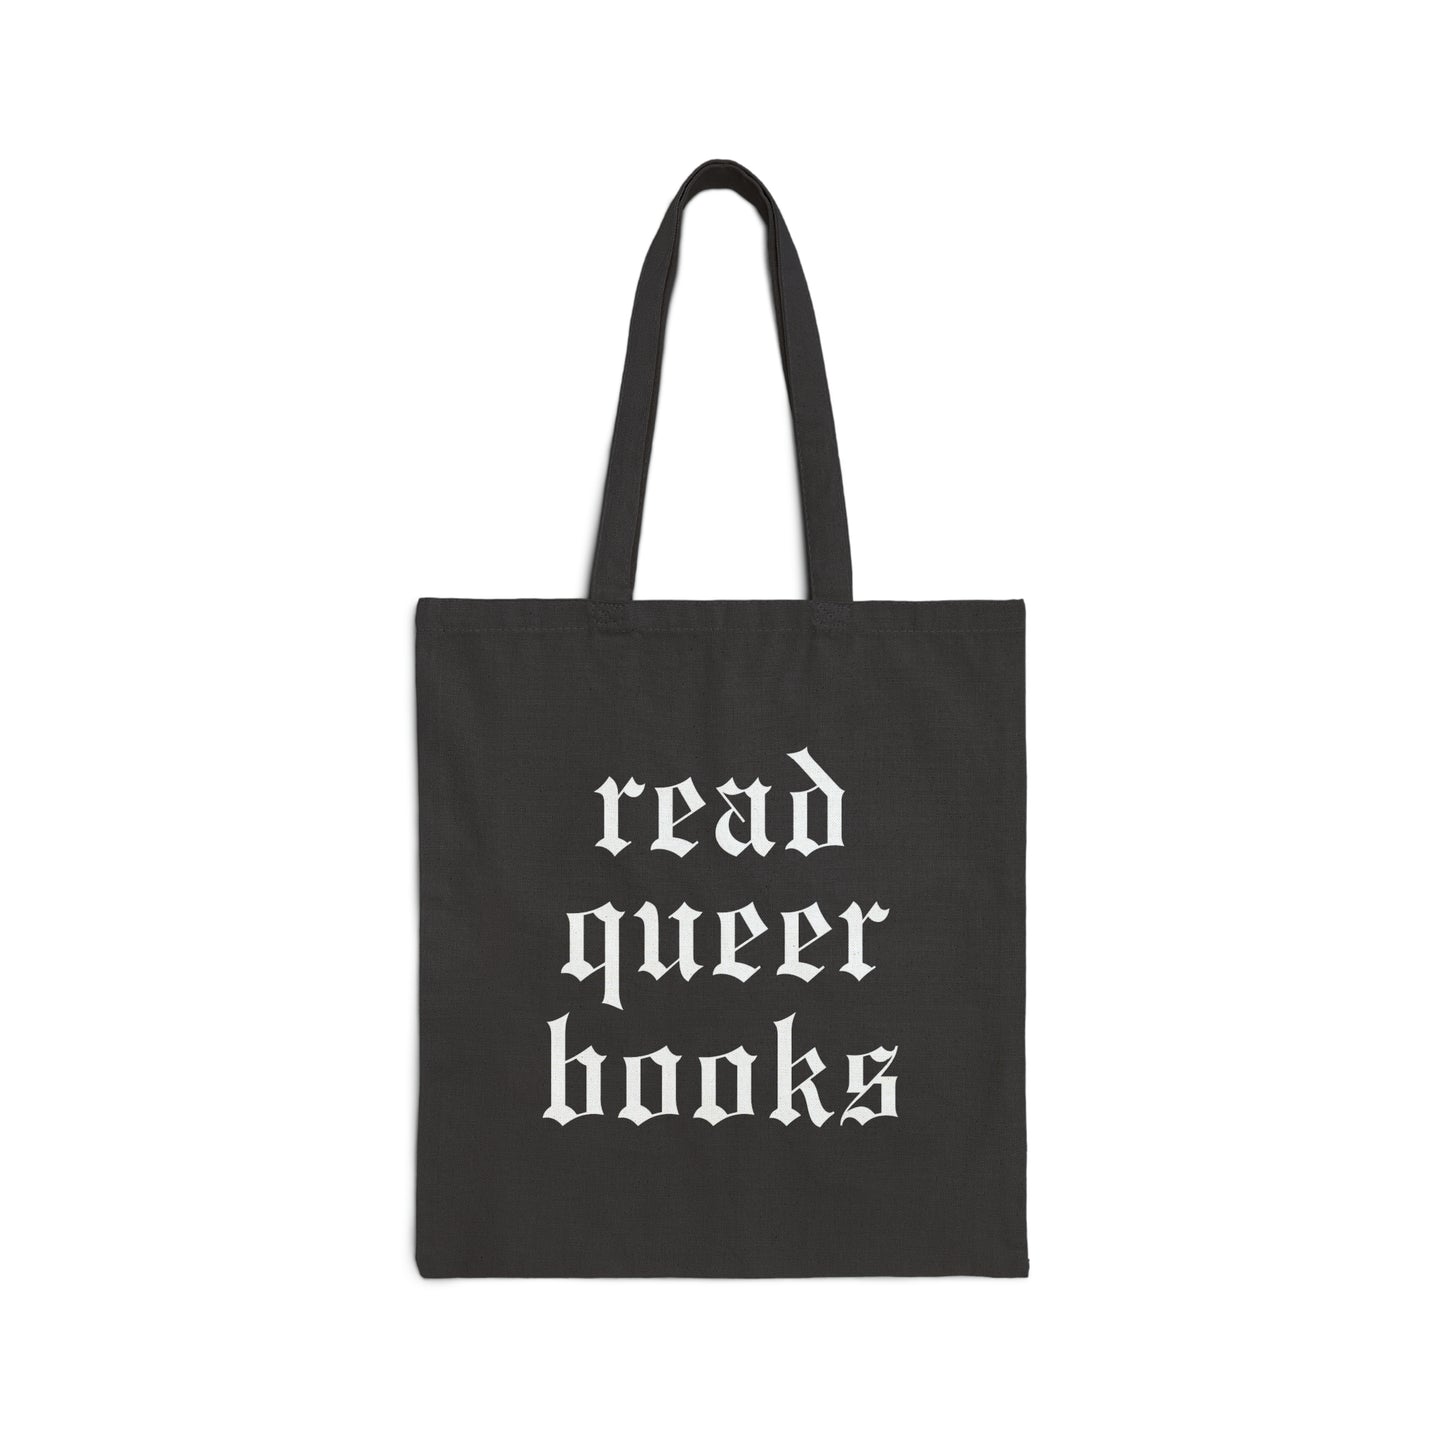 Read Queer Books Canvas Tote Bag